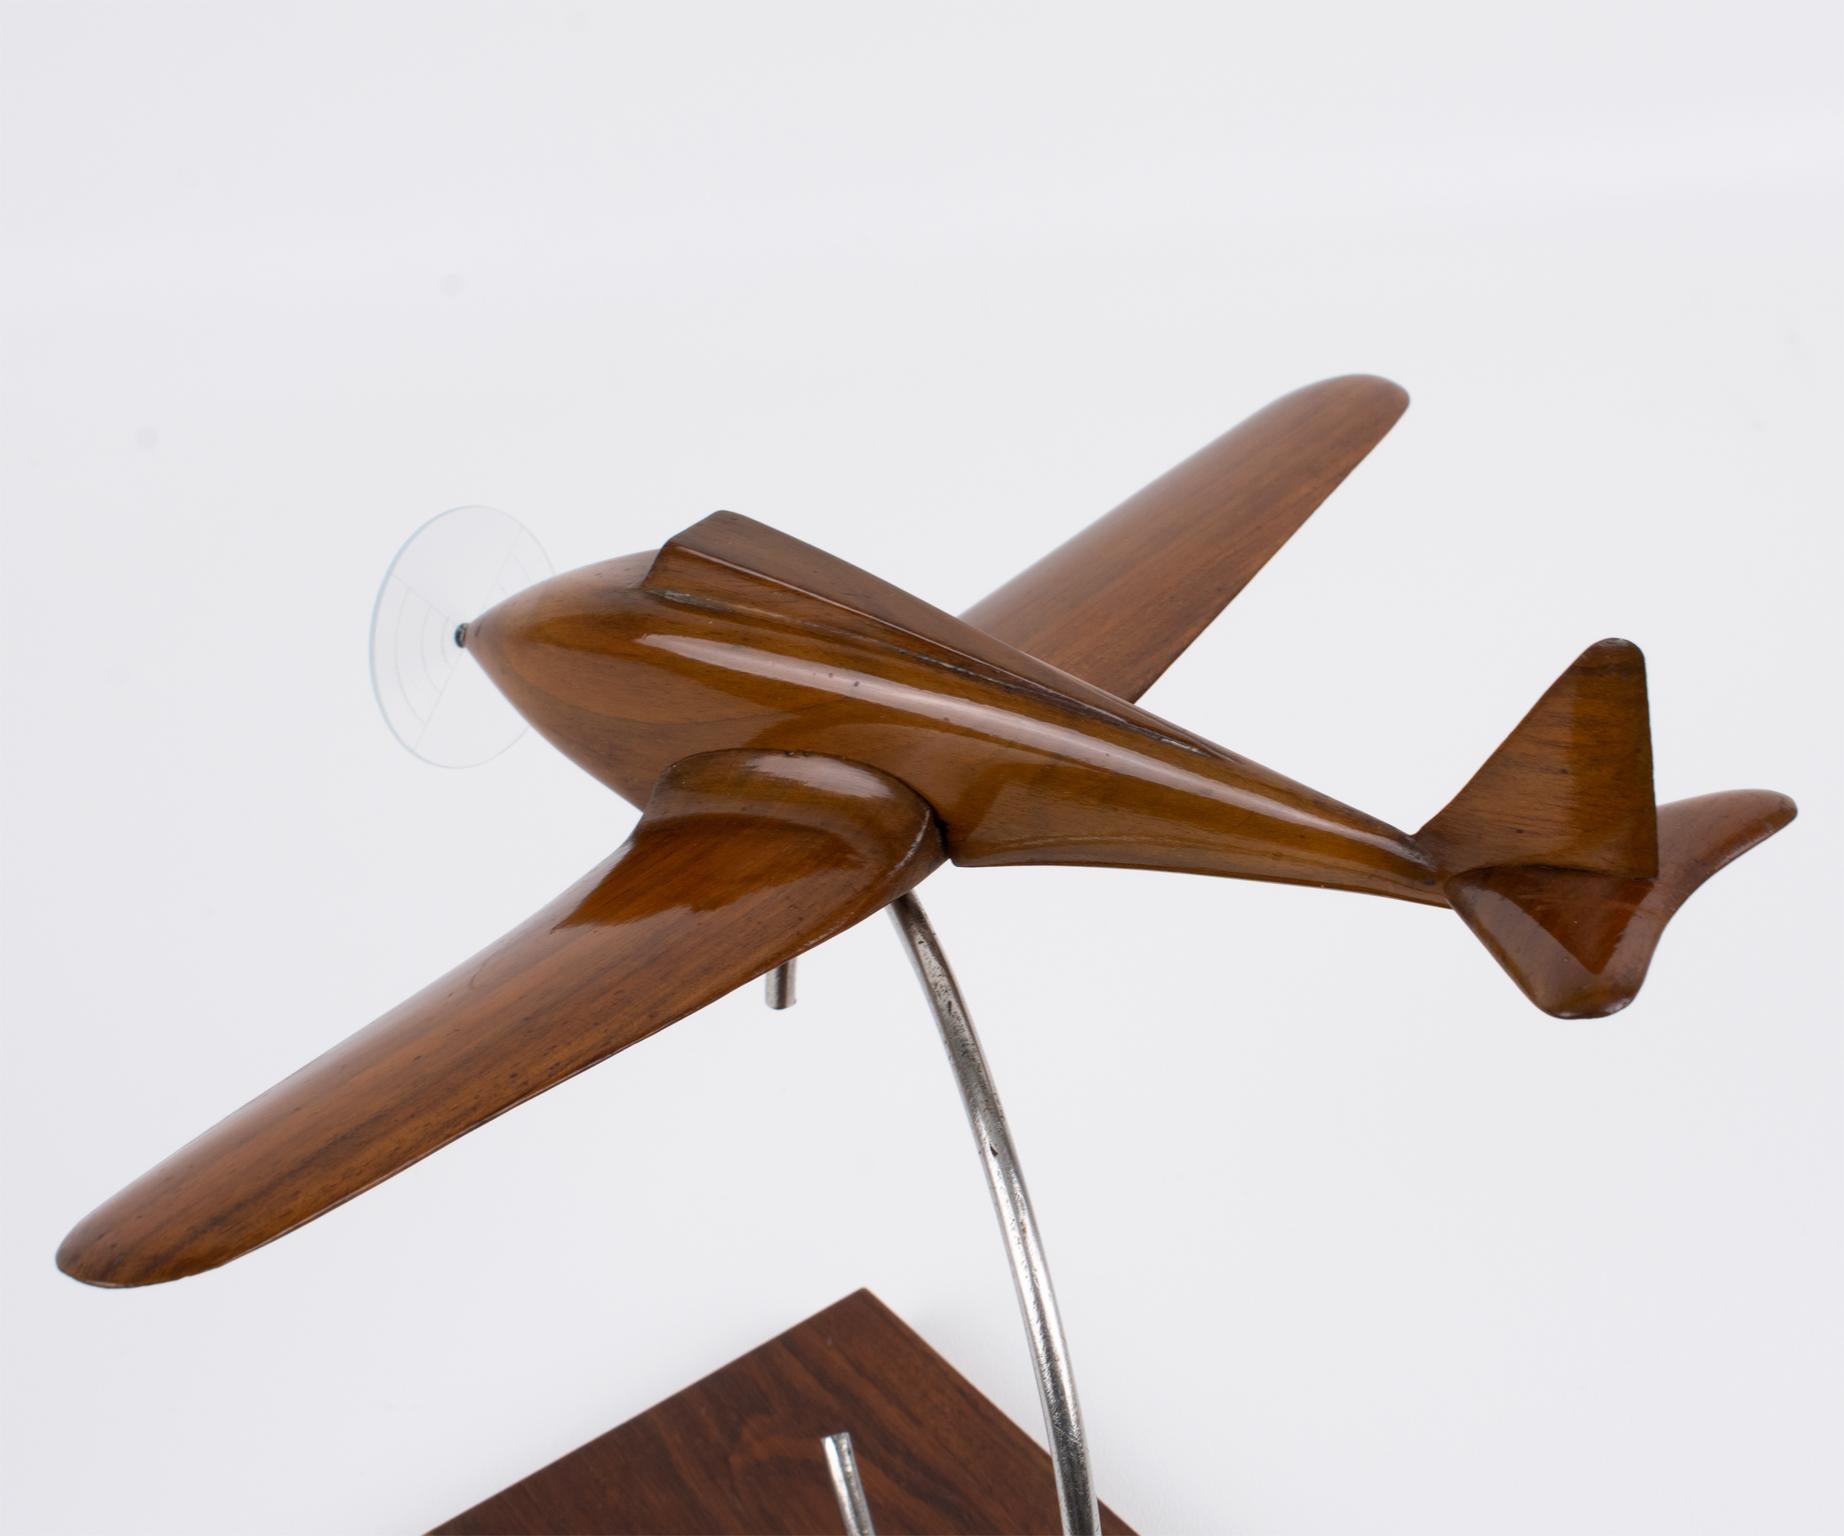 Art Deco Wood and Metal Airplane Aviation Propeller Model, France 1930s For Sale 6